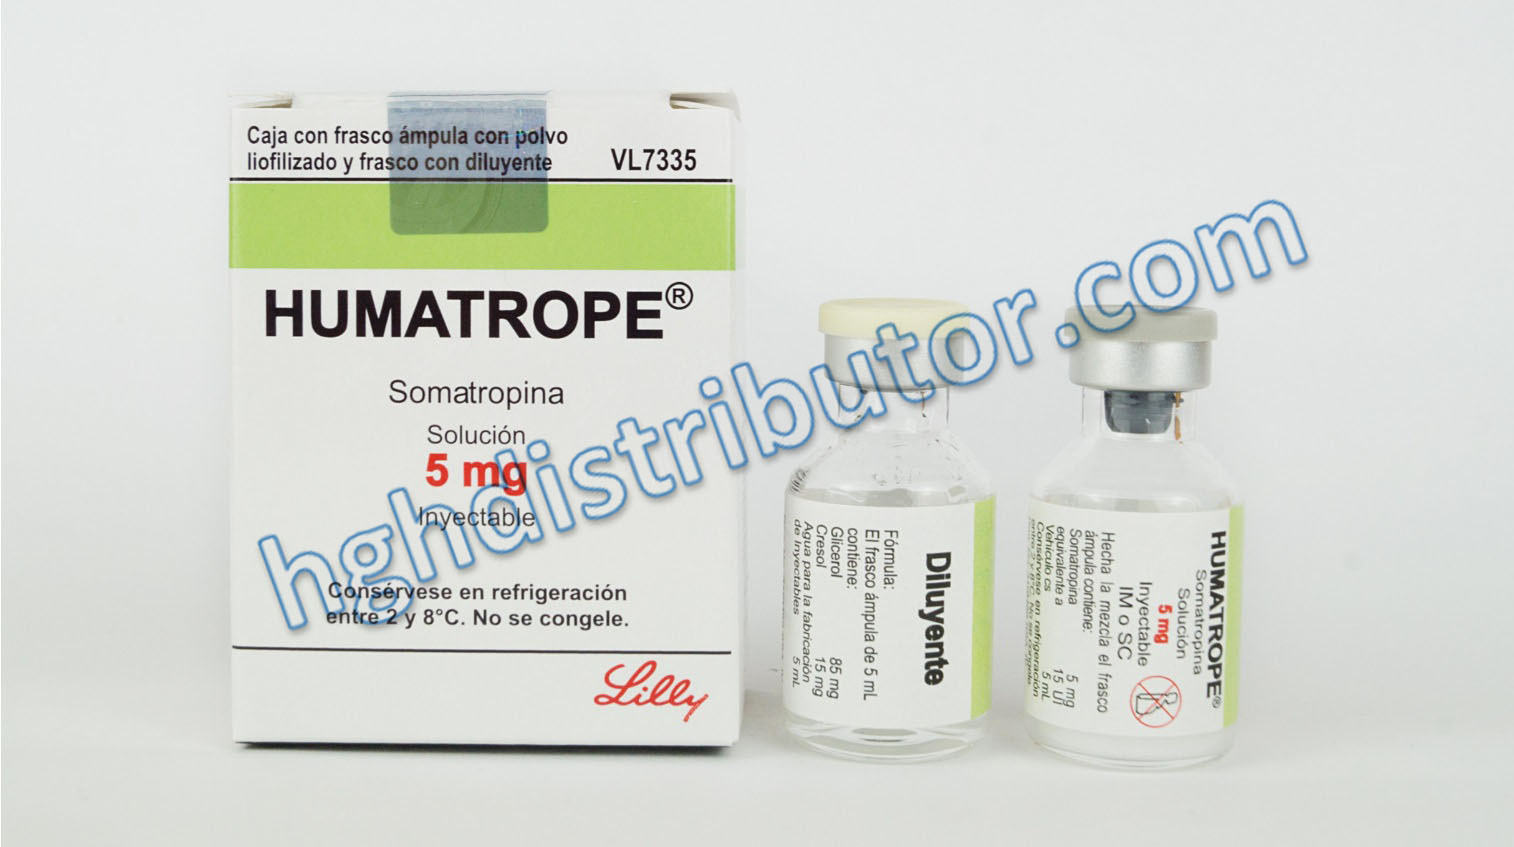 Image of Humatrope 5mg packaging with syringes.